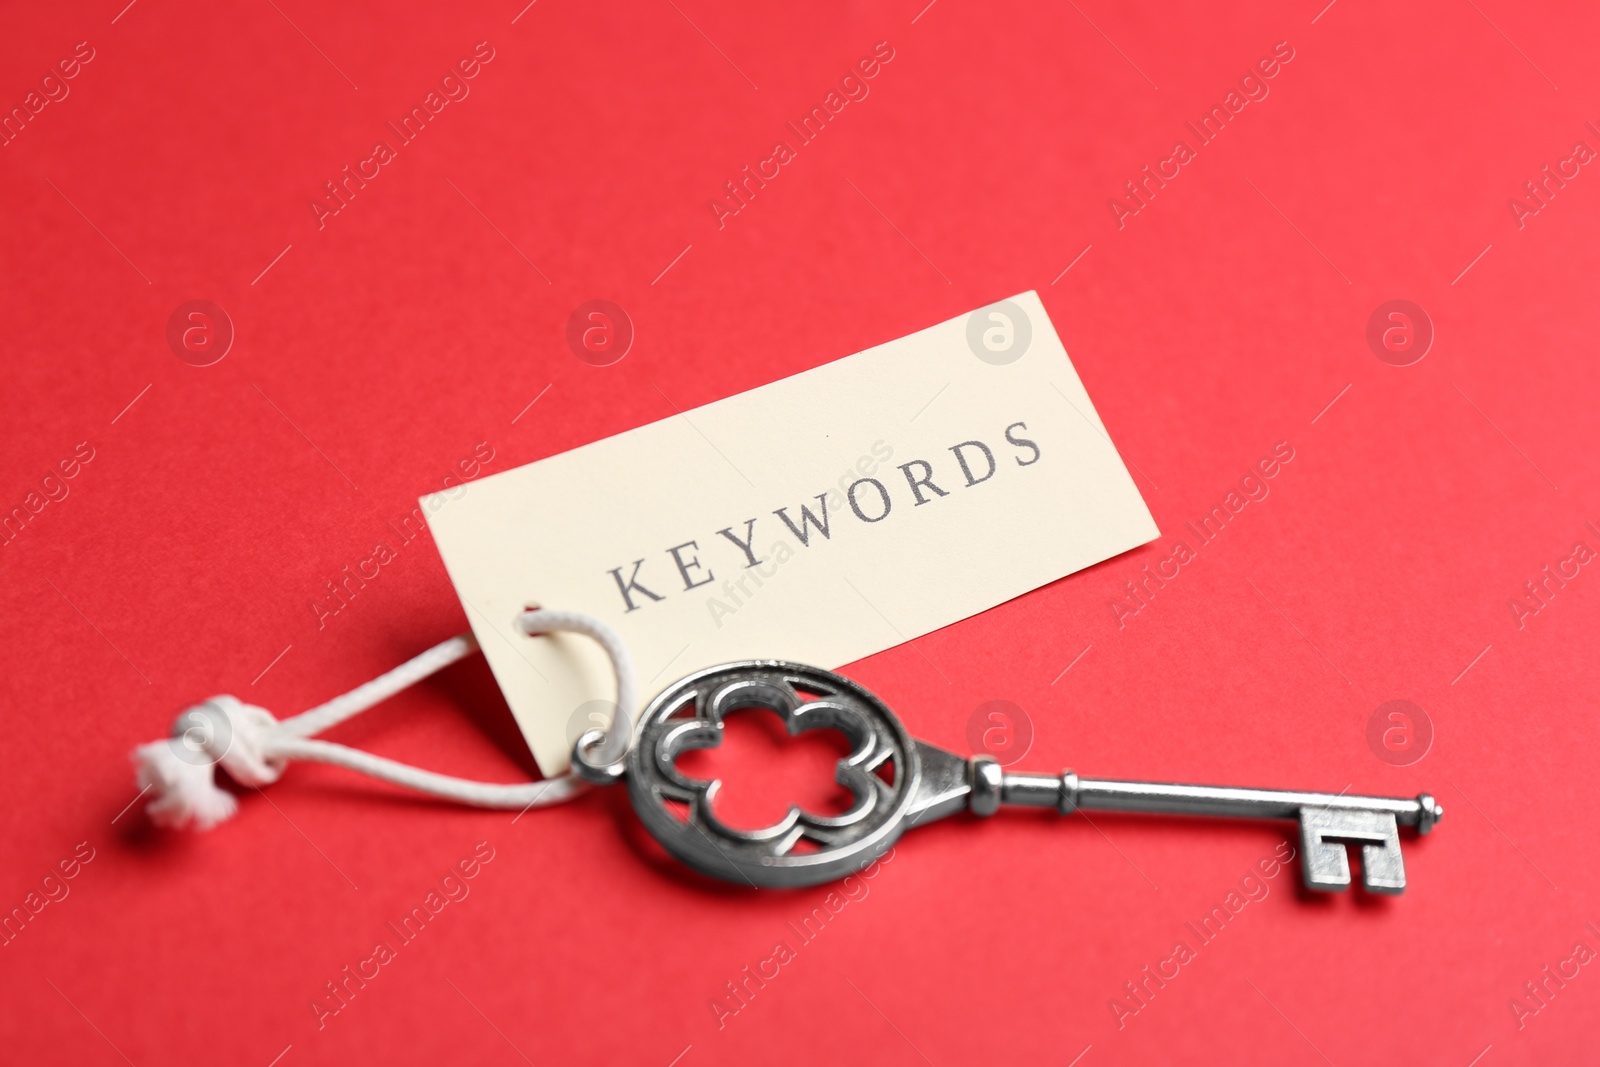 Photo of Vintage key and tag wIth word KEYWORDS on red background